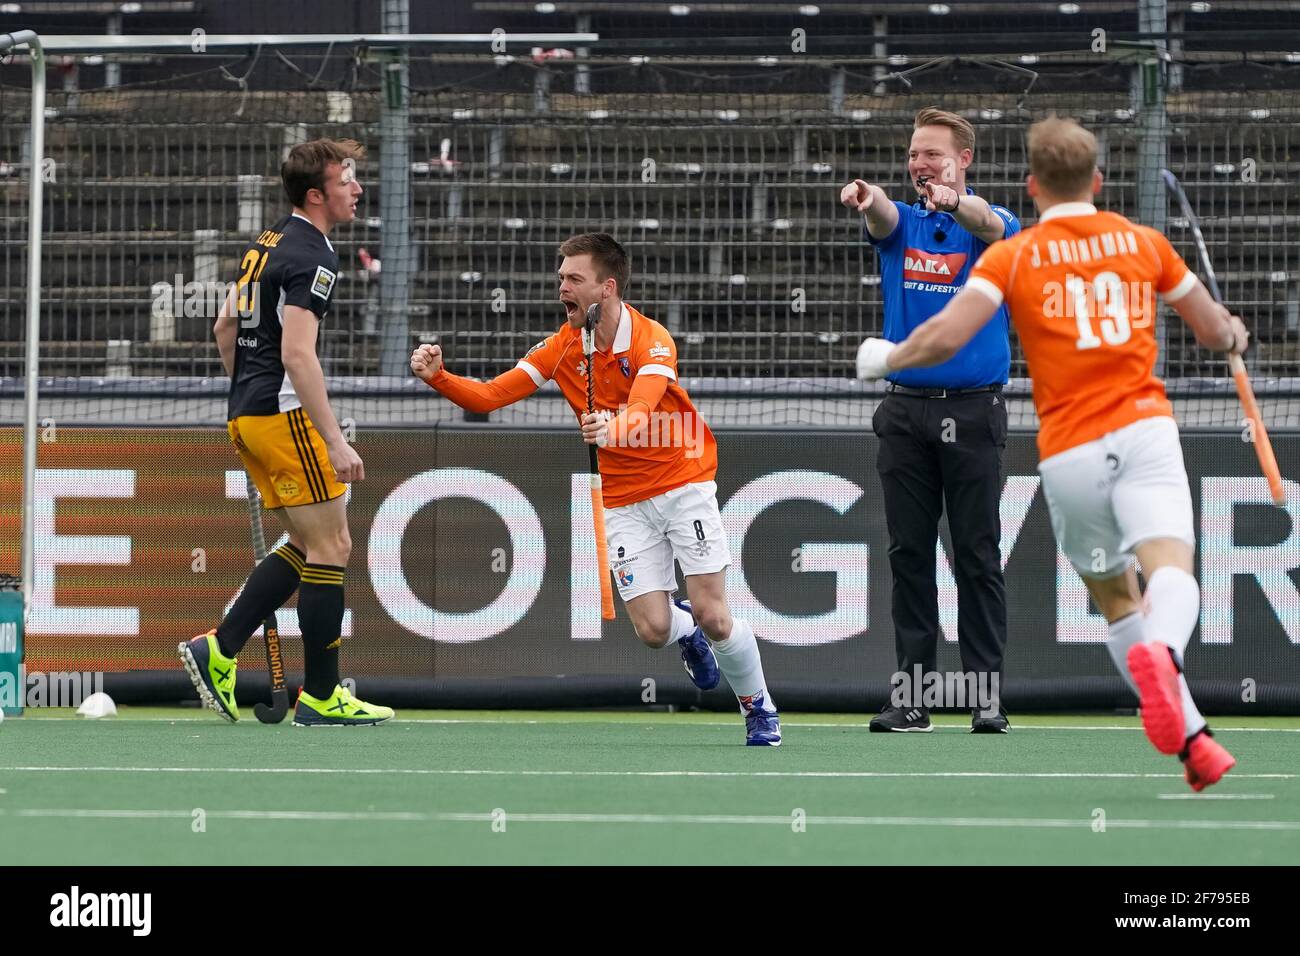 AMSTELVEEN, NETHERLANDS - APRIL 5: Thierry Brinkman of Bloemendaal celebrates after scoring his sides second goal during the Euro Hockey League Final Stock Photo